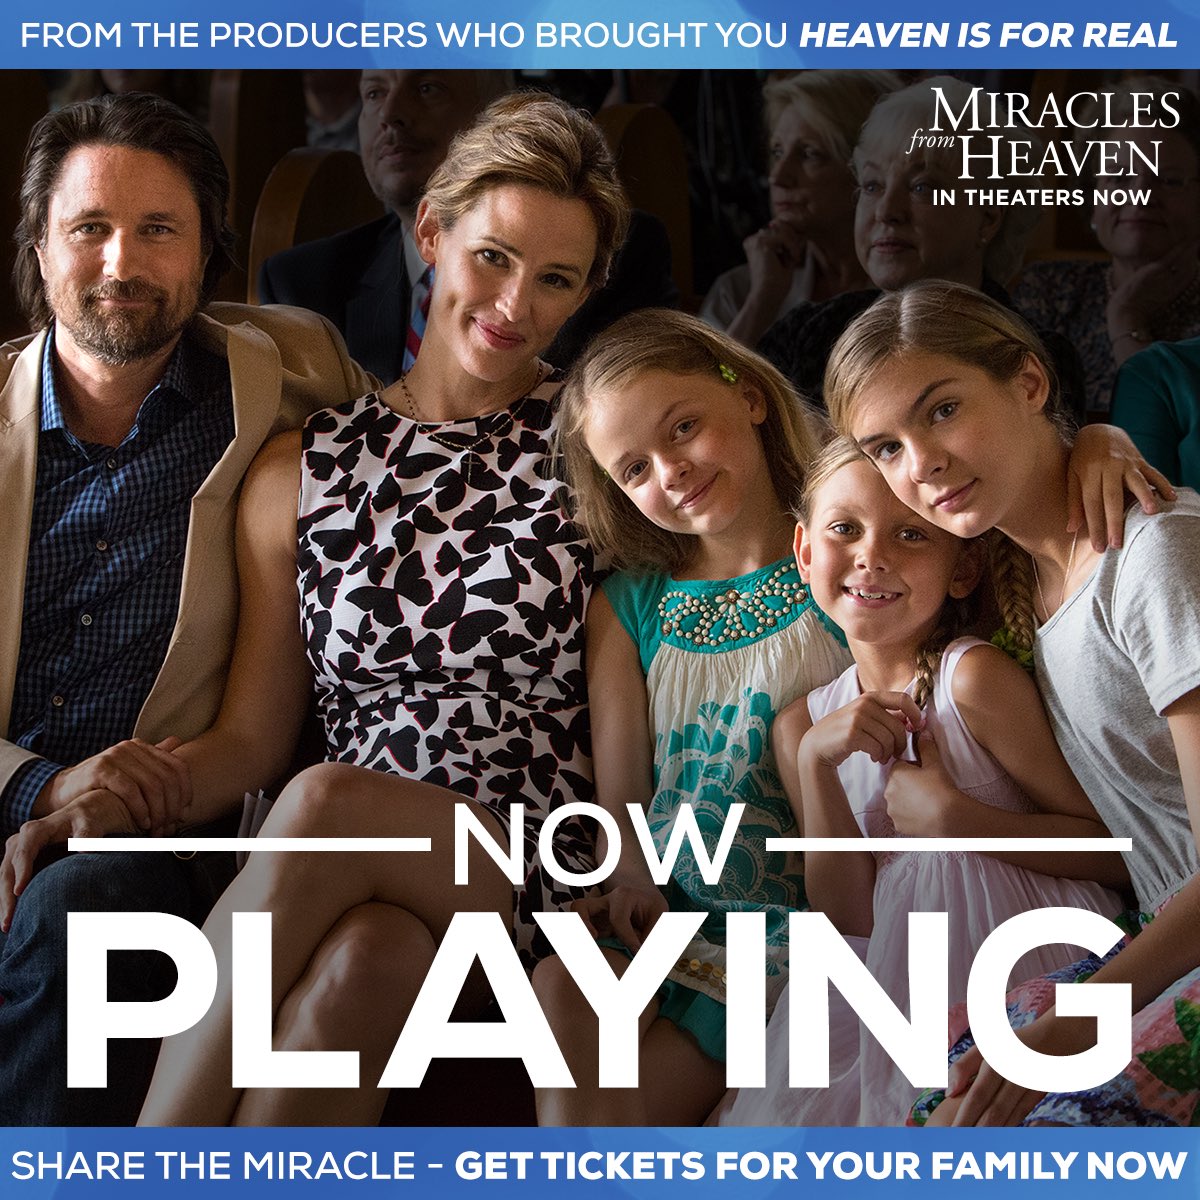 RT @BishopJakes: #MiraclesFromHeaven now playing at a theater near you. Get tickets today at >>https://t.co/0d4KxZOu80 https://t.co/6YPYGo3…